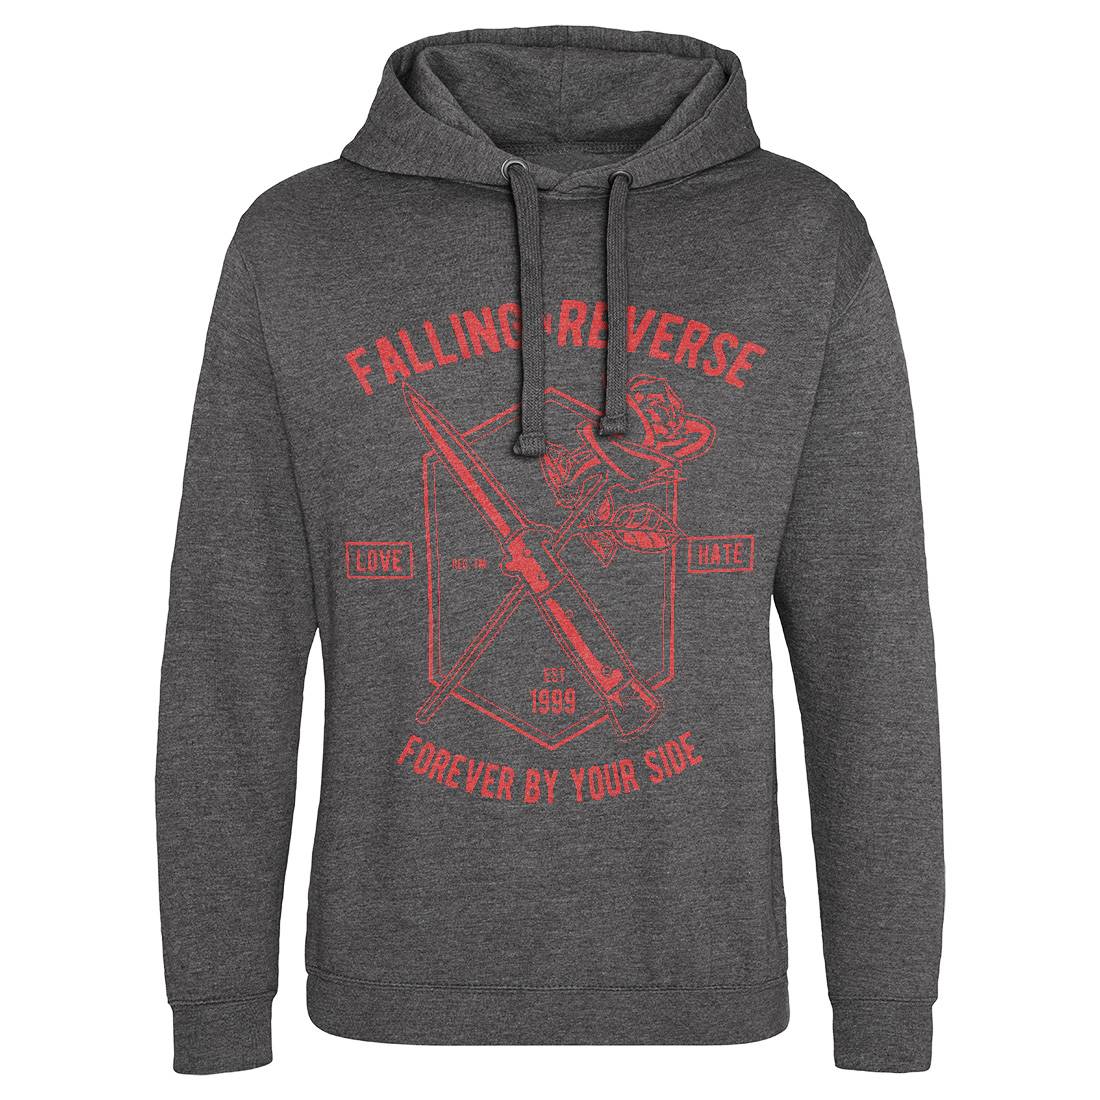 Falling In Reverse Mens Hoodie Without Pocket Warriors A050